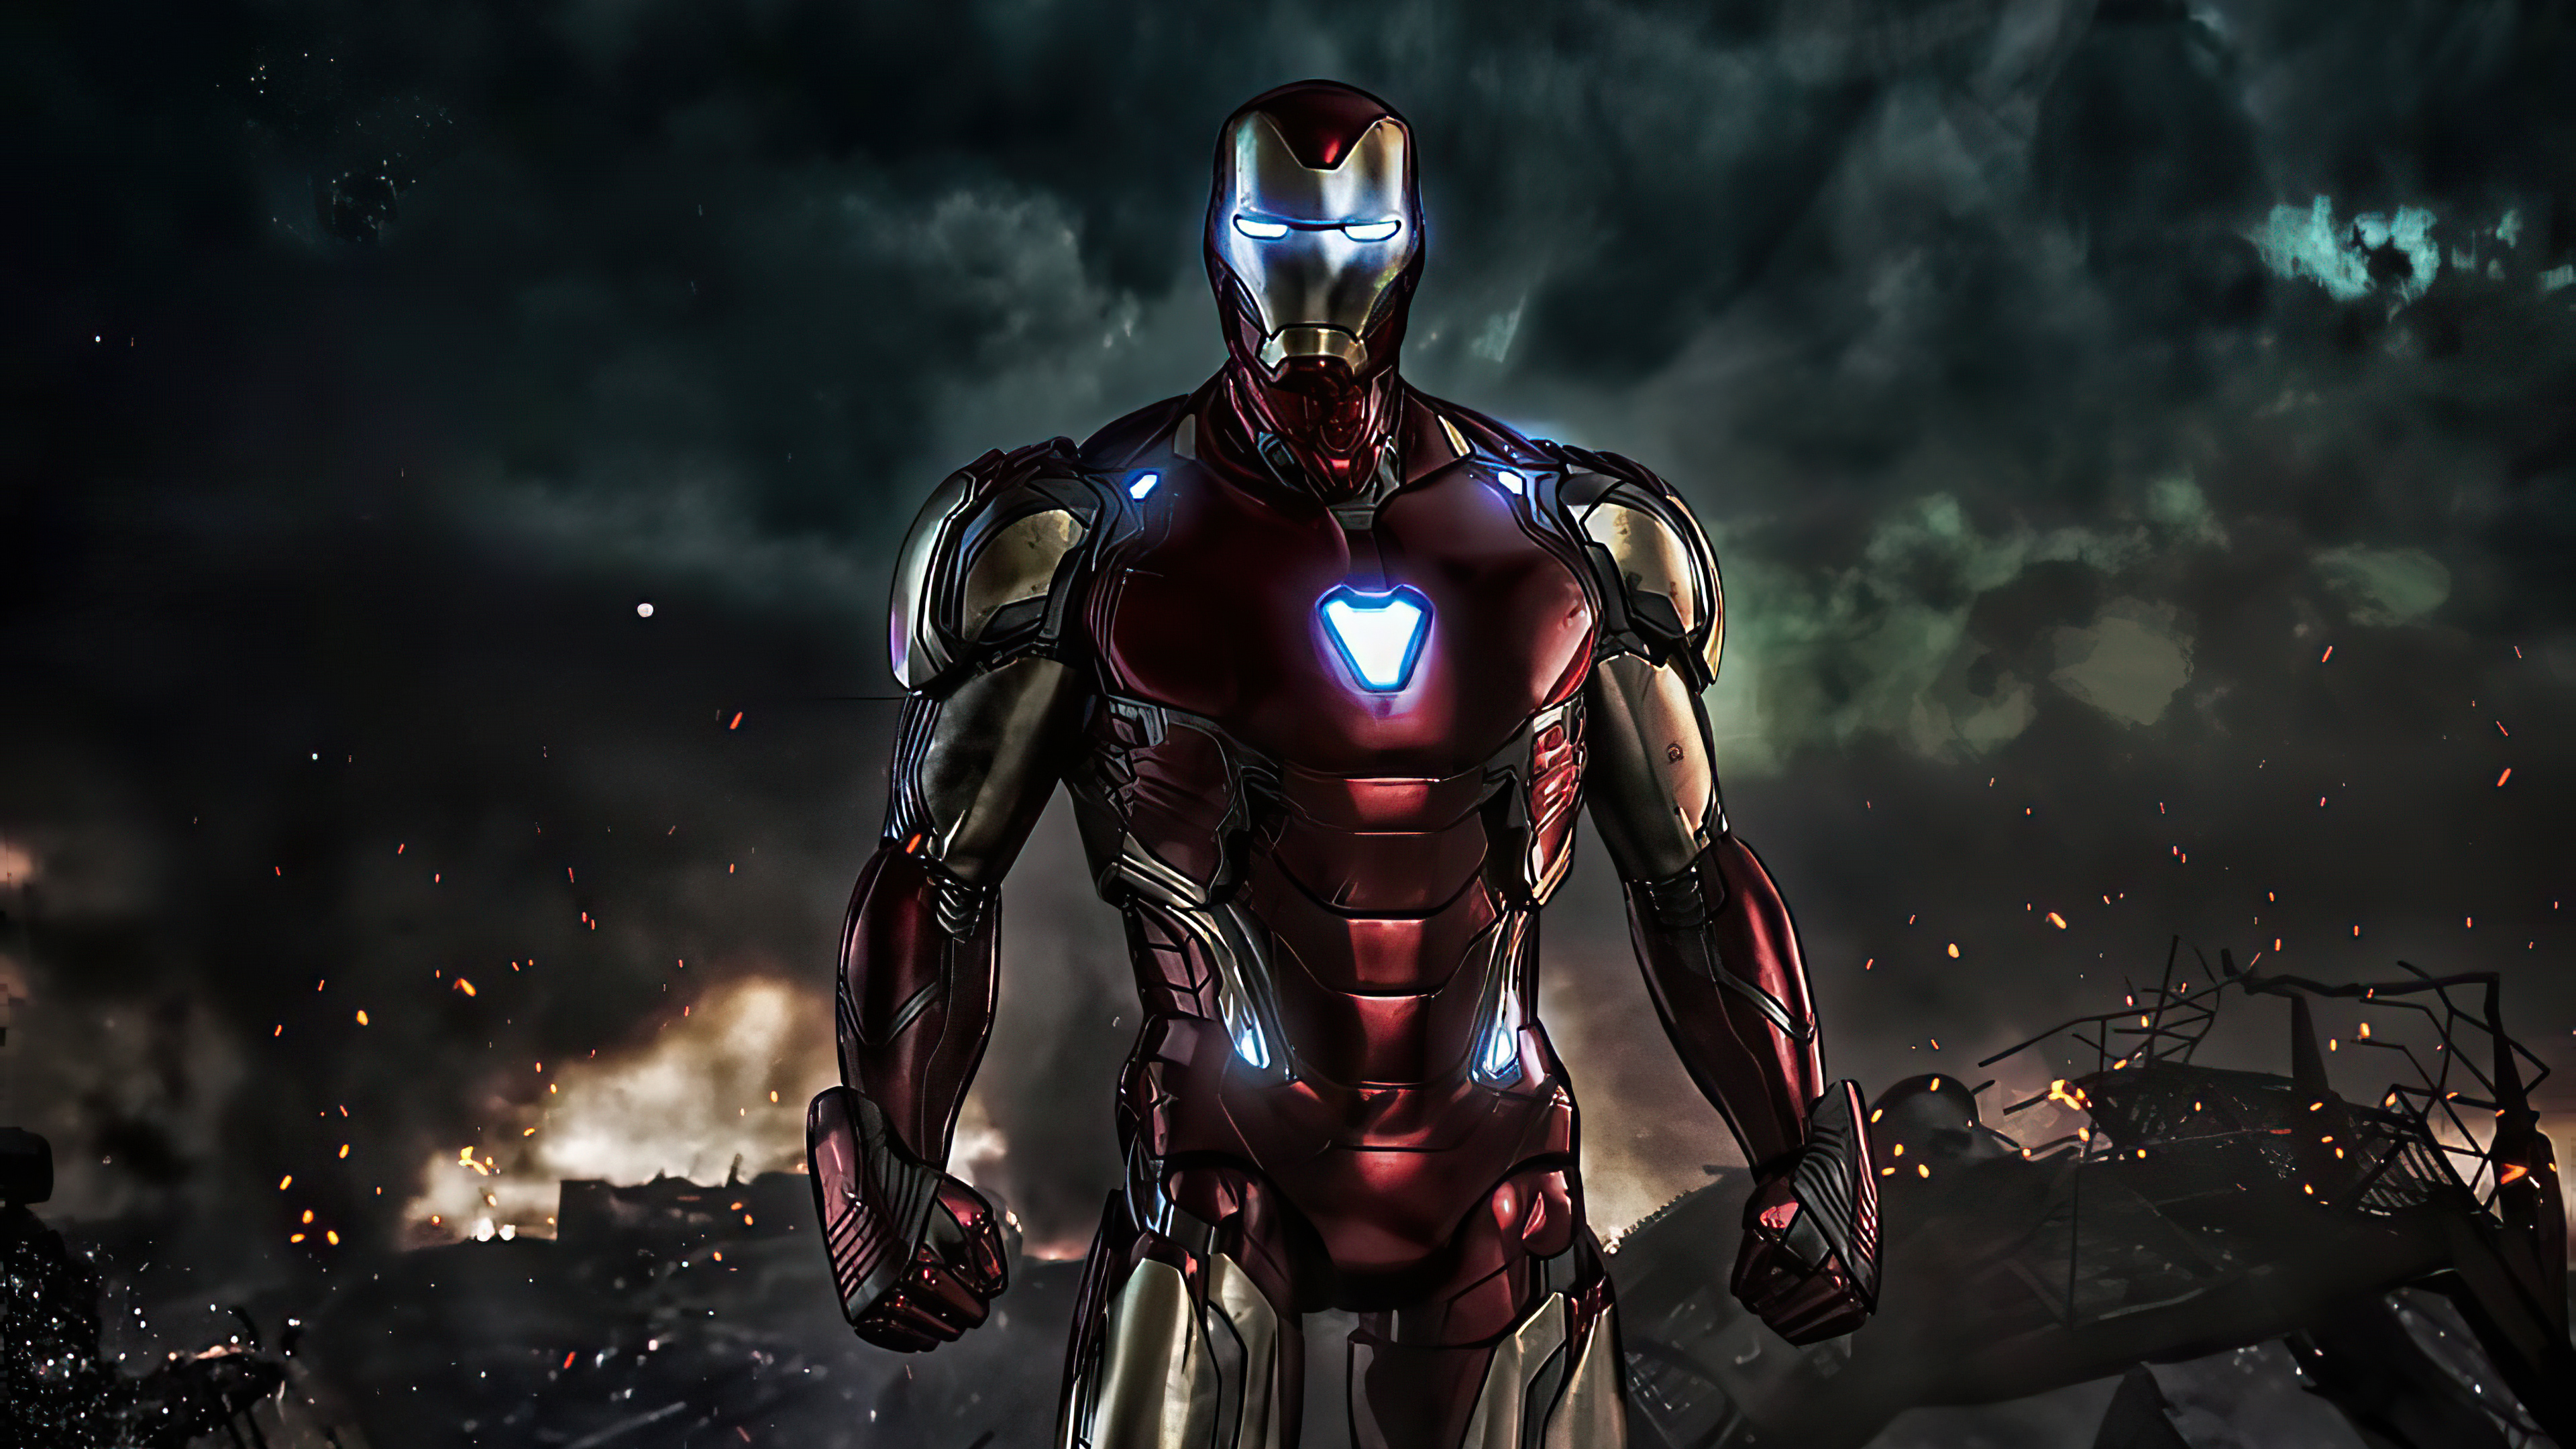 100+] Iron Man And Spider-man Wallpapers | Wallpapers.com